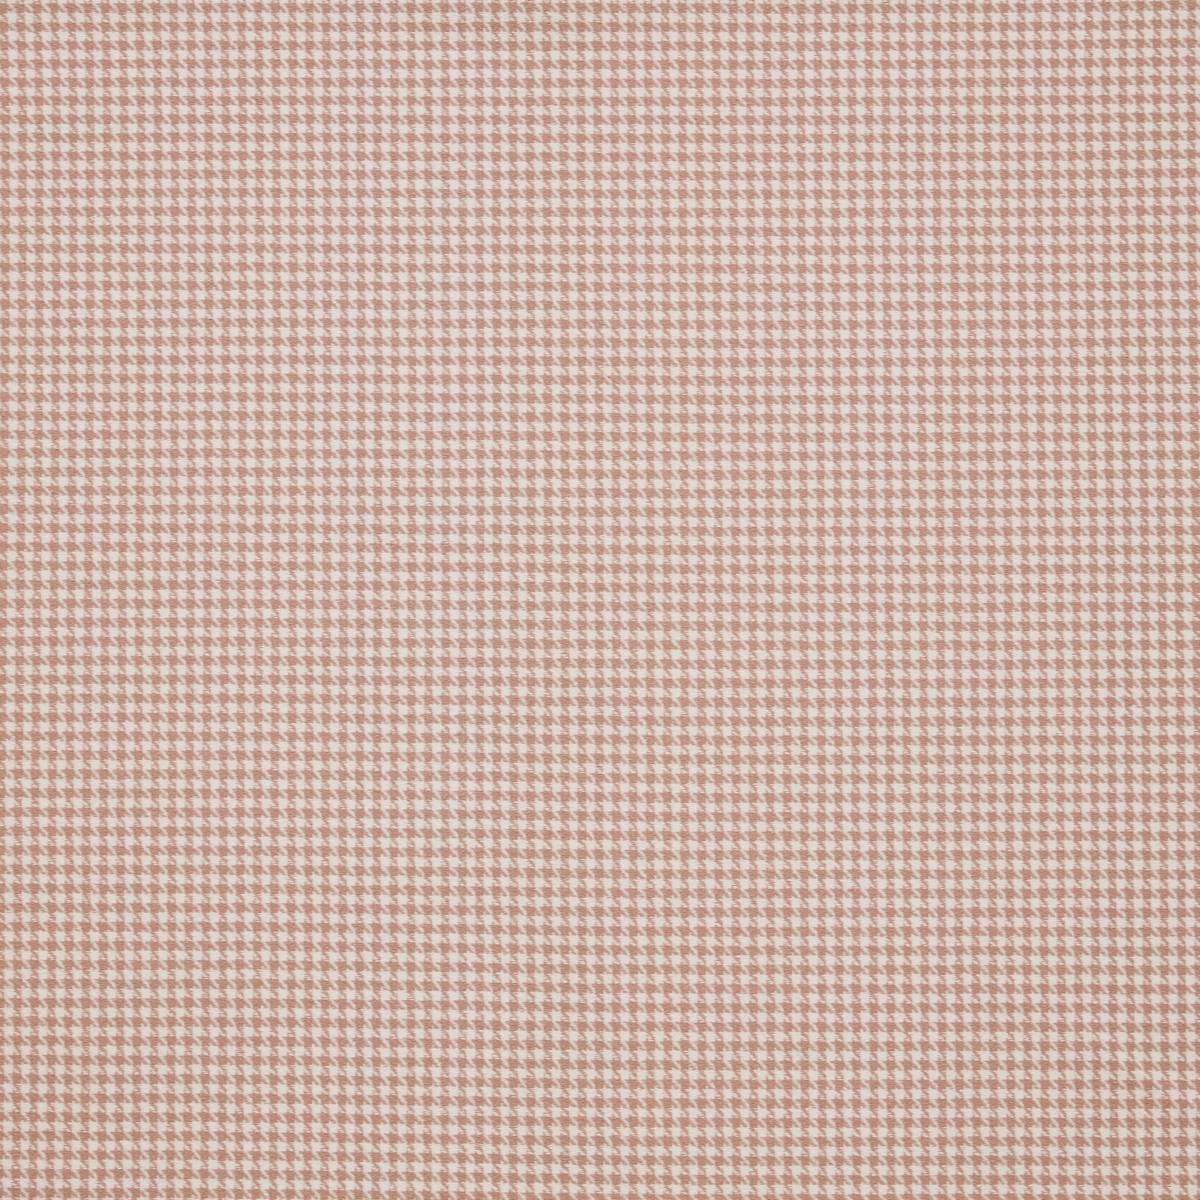 Houndstooth Blush Fabric by iLiv